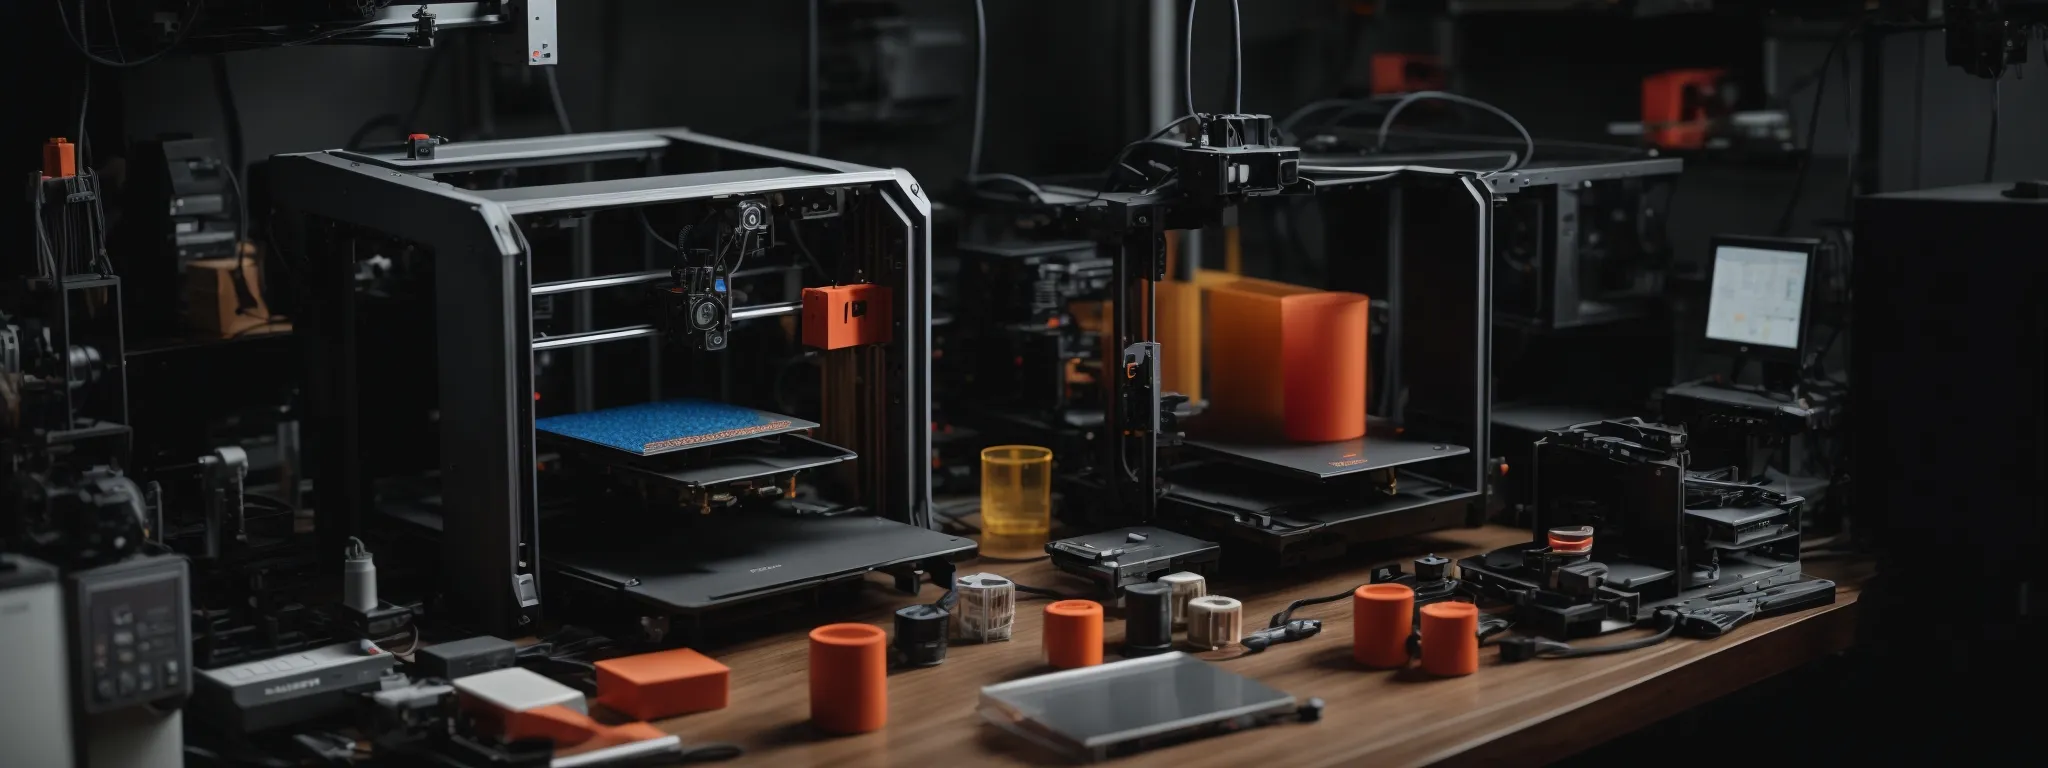 a 3d printer sits idle, surrounded by various finished printed objects and tools for post-processing.